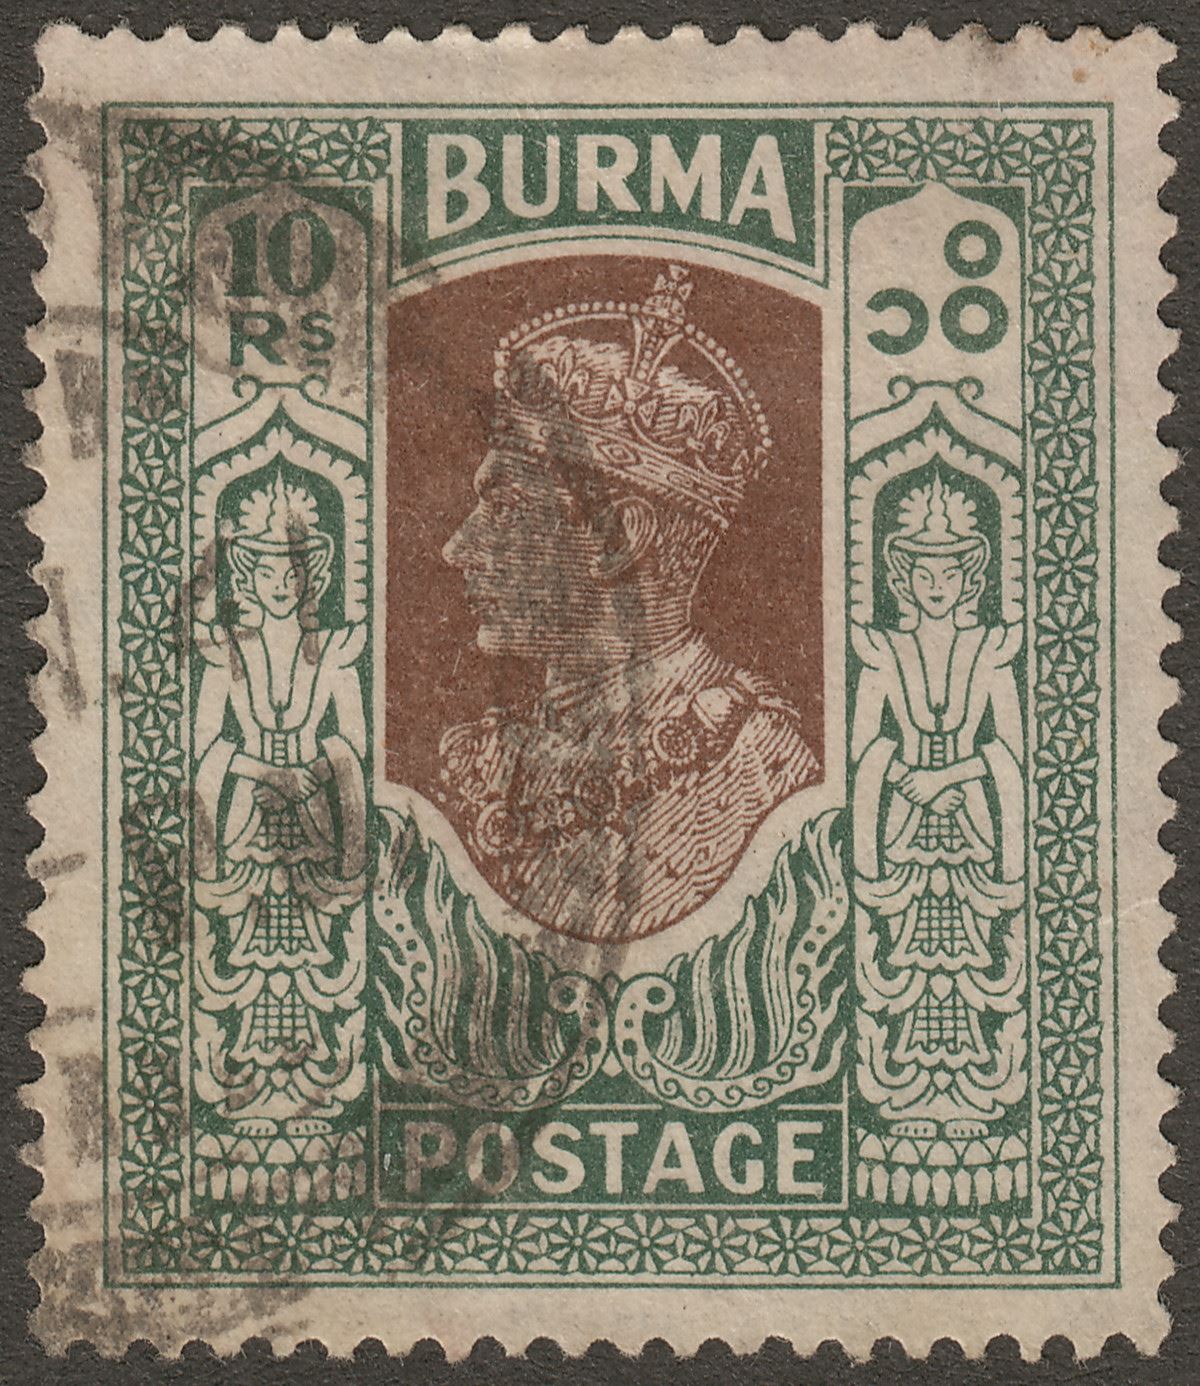 Burma 1938 King George VI 10r Brown and Myrtle Used SG33 cat £100